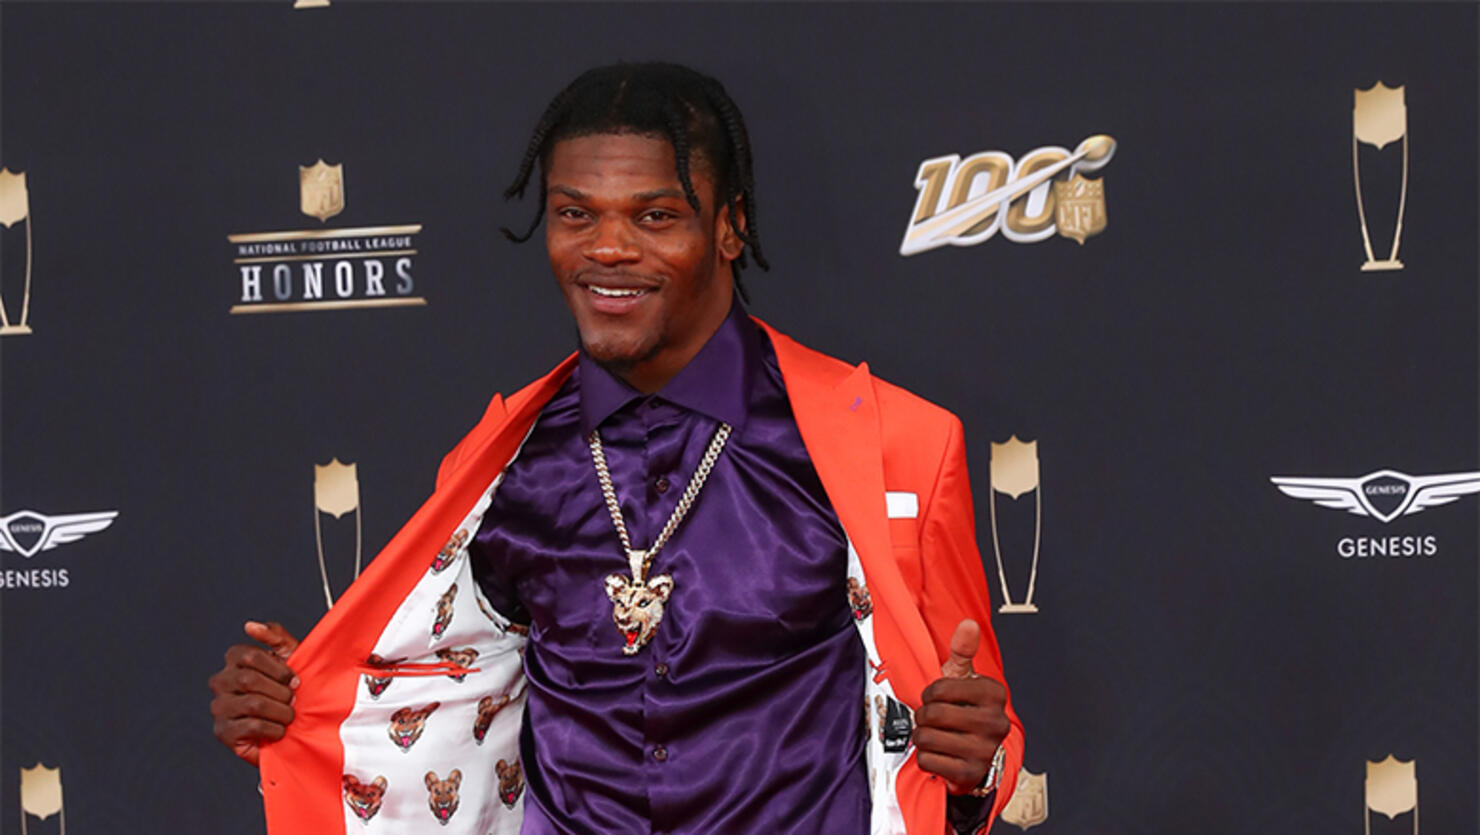 Lamar Jackson Second Player To Win NFL MVP With Unanimous Vote